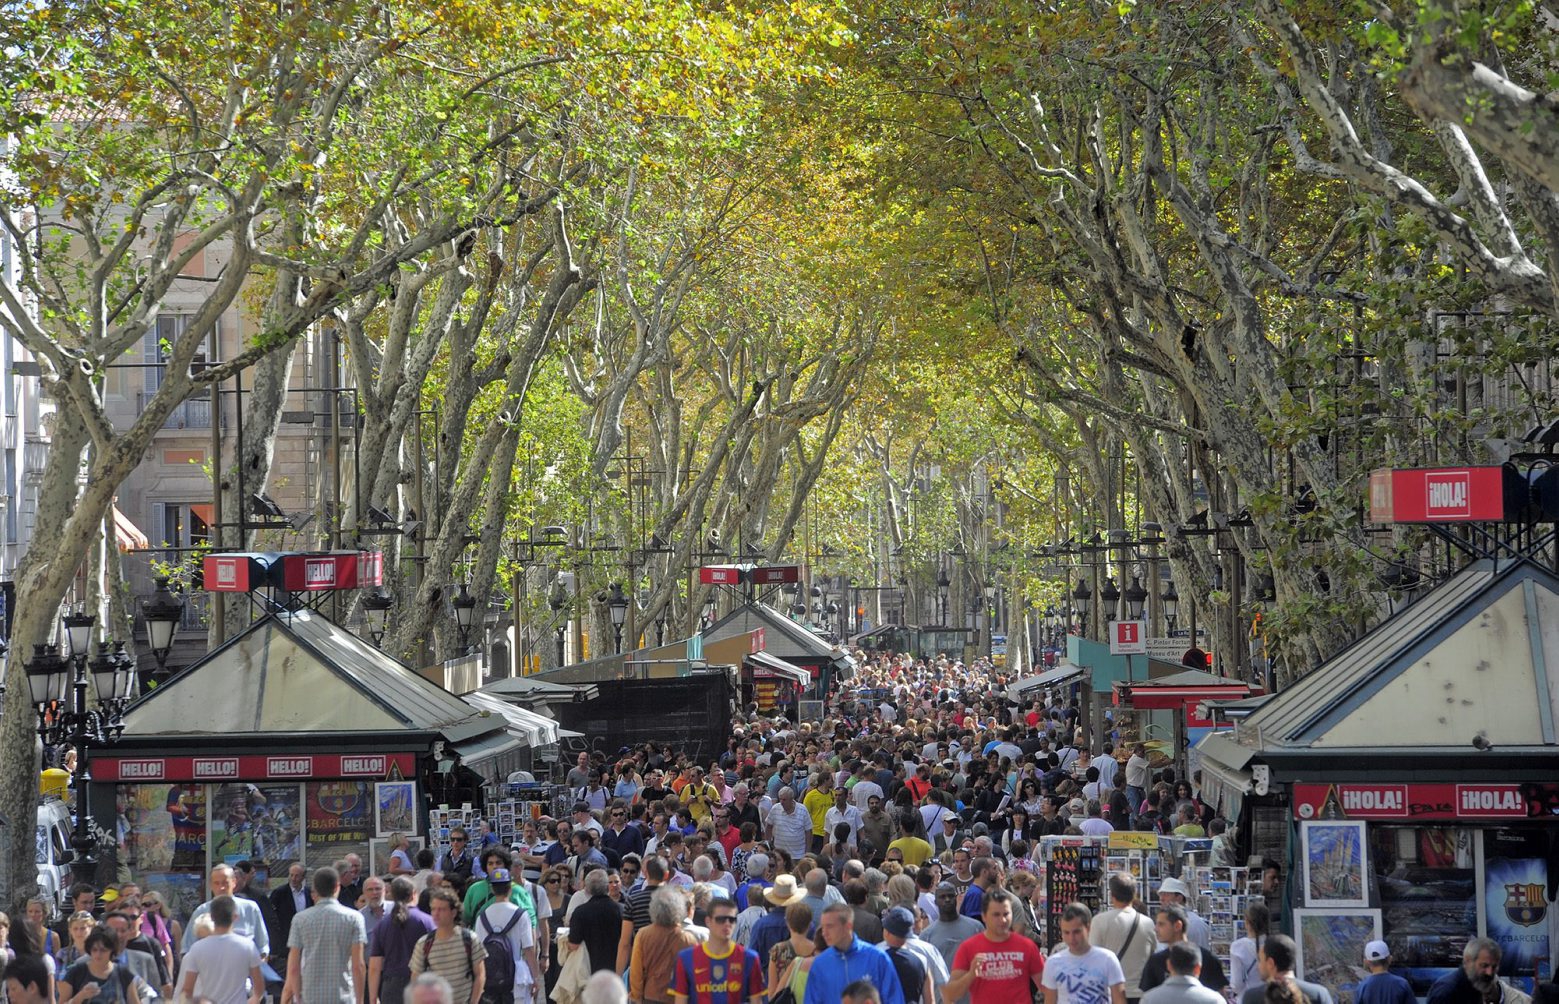 FILE - In this Oct. 4, 2010 file photo, people walk along Ramblas Street in Barcelona, Spain.  Police officials in Spain said on Wednesday Aug. 21, 2019, that muggings or street robberies, employing violence or intimidation have spiked sharply in Barcelona. (AP Photo/Manu Fernandez, File) Spain Barcelona Crime